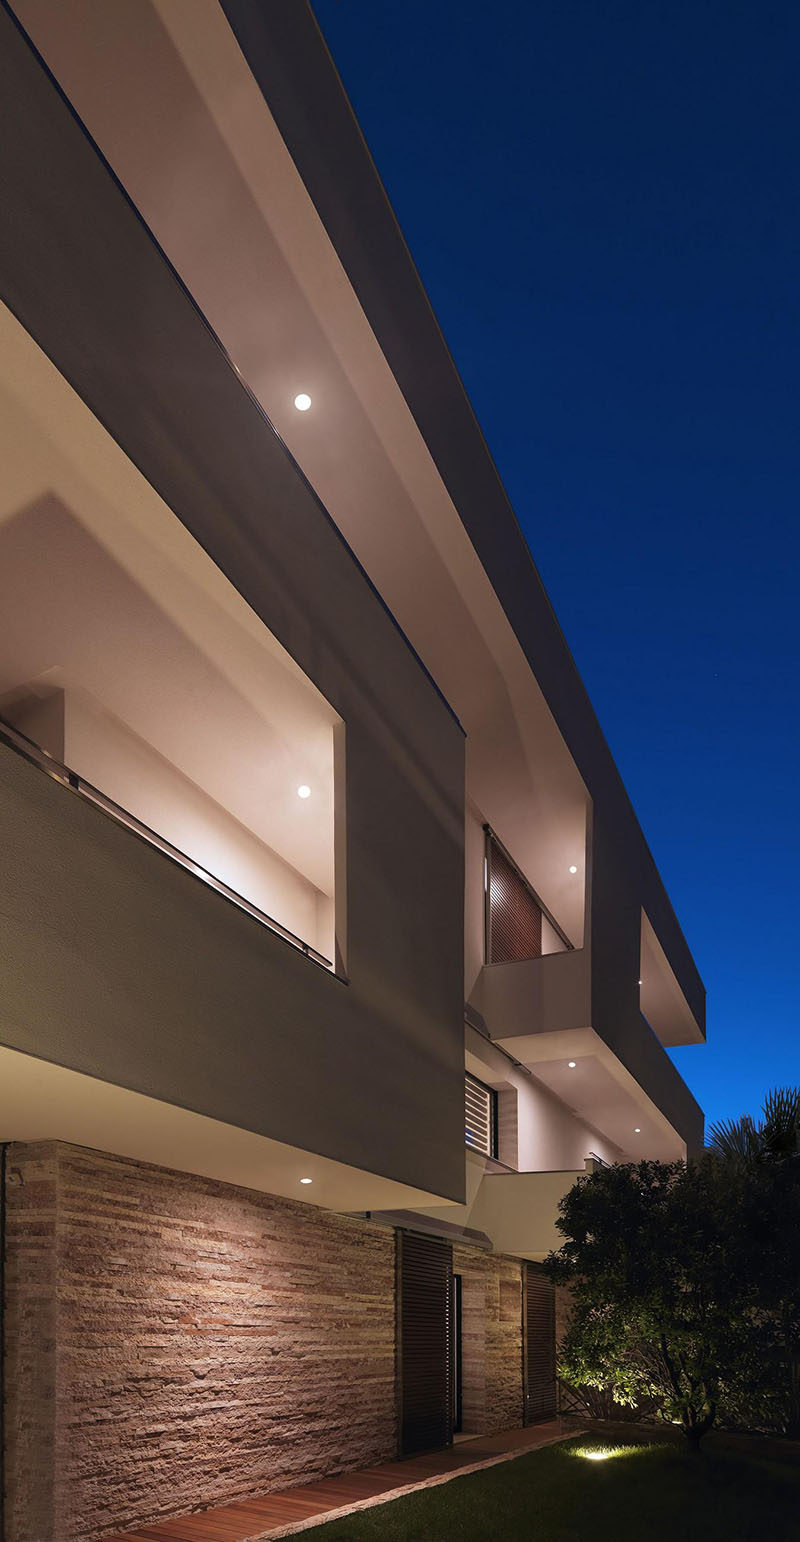 Lighting was added to this home to show off the balconies, and make the home feel more inviting.